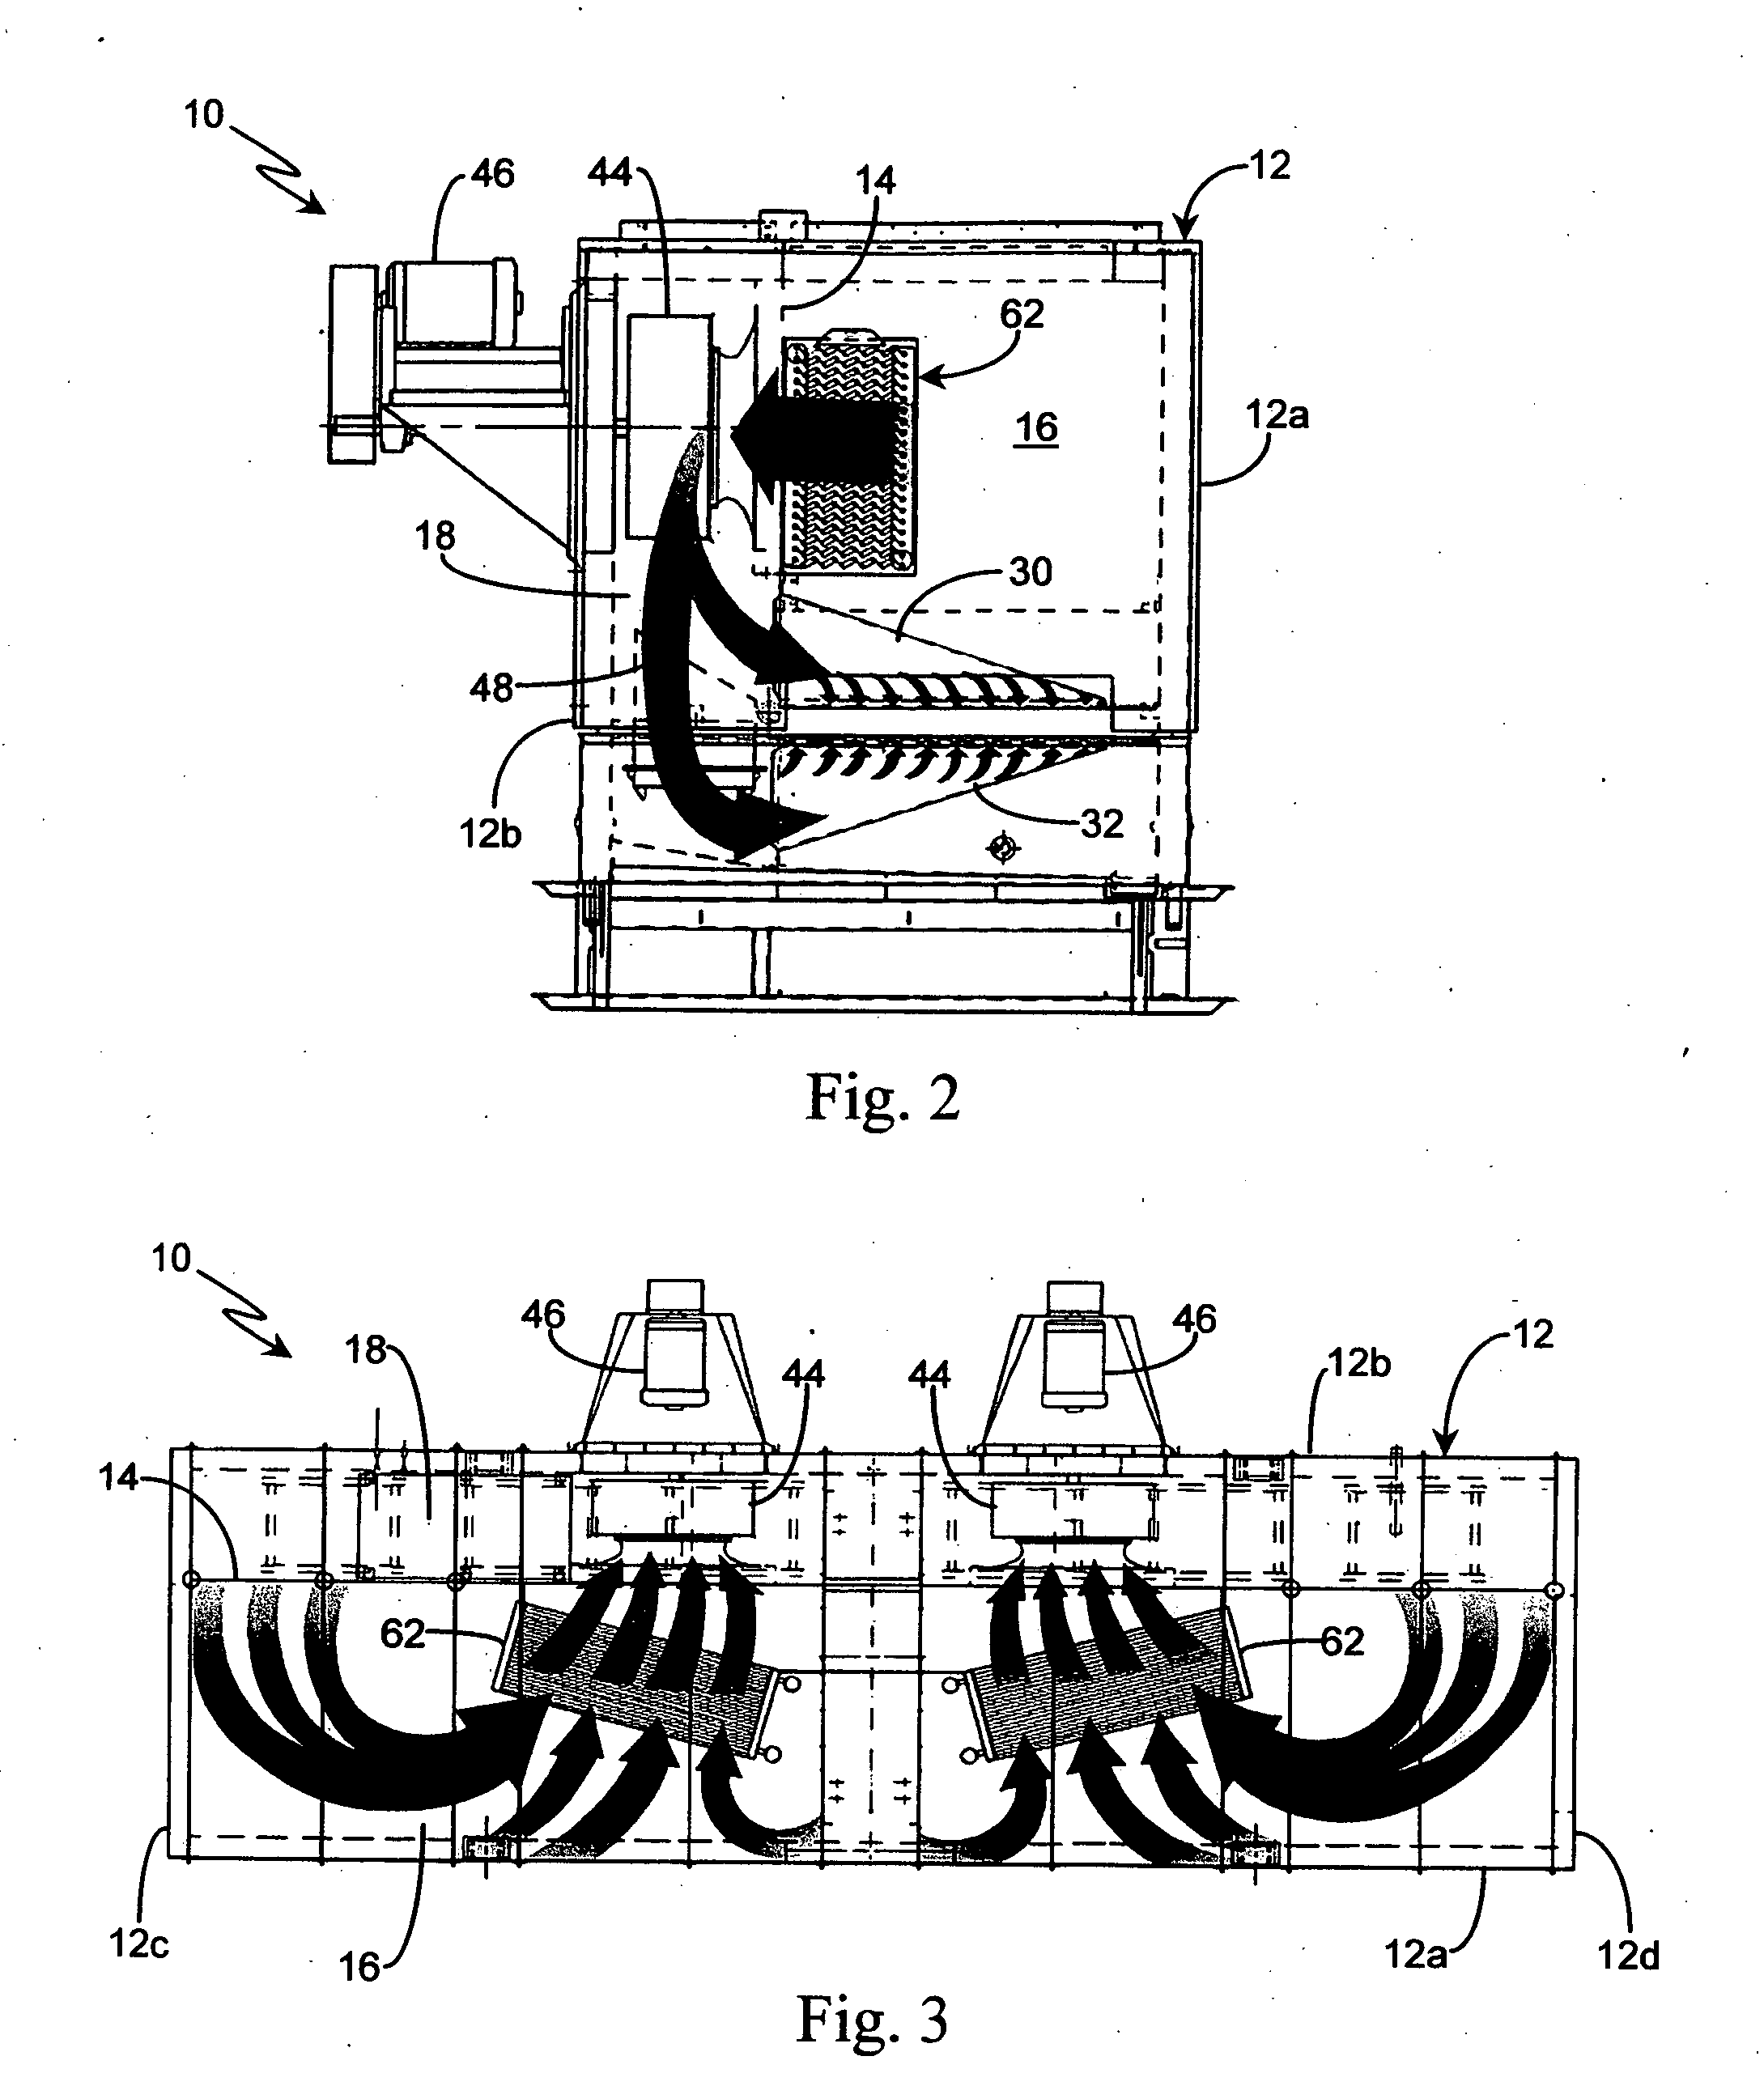 Dry food pasteurization apparatus and method